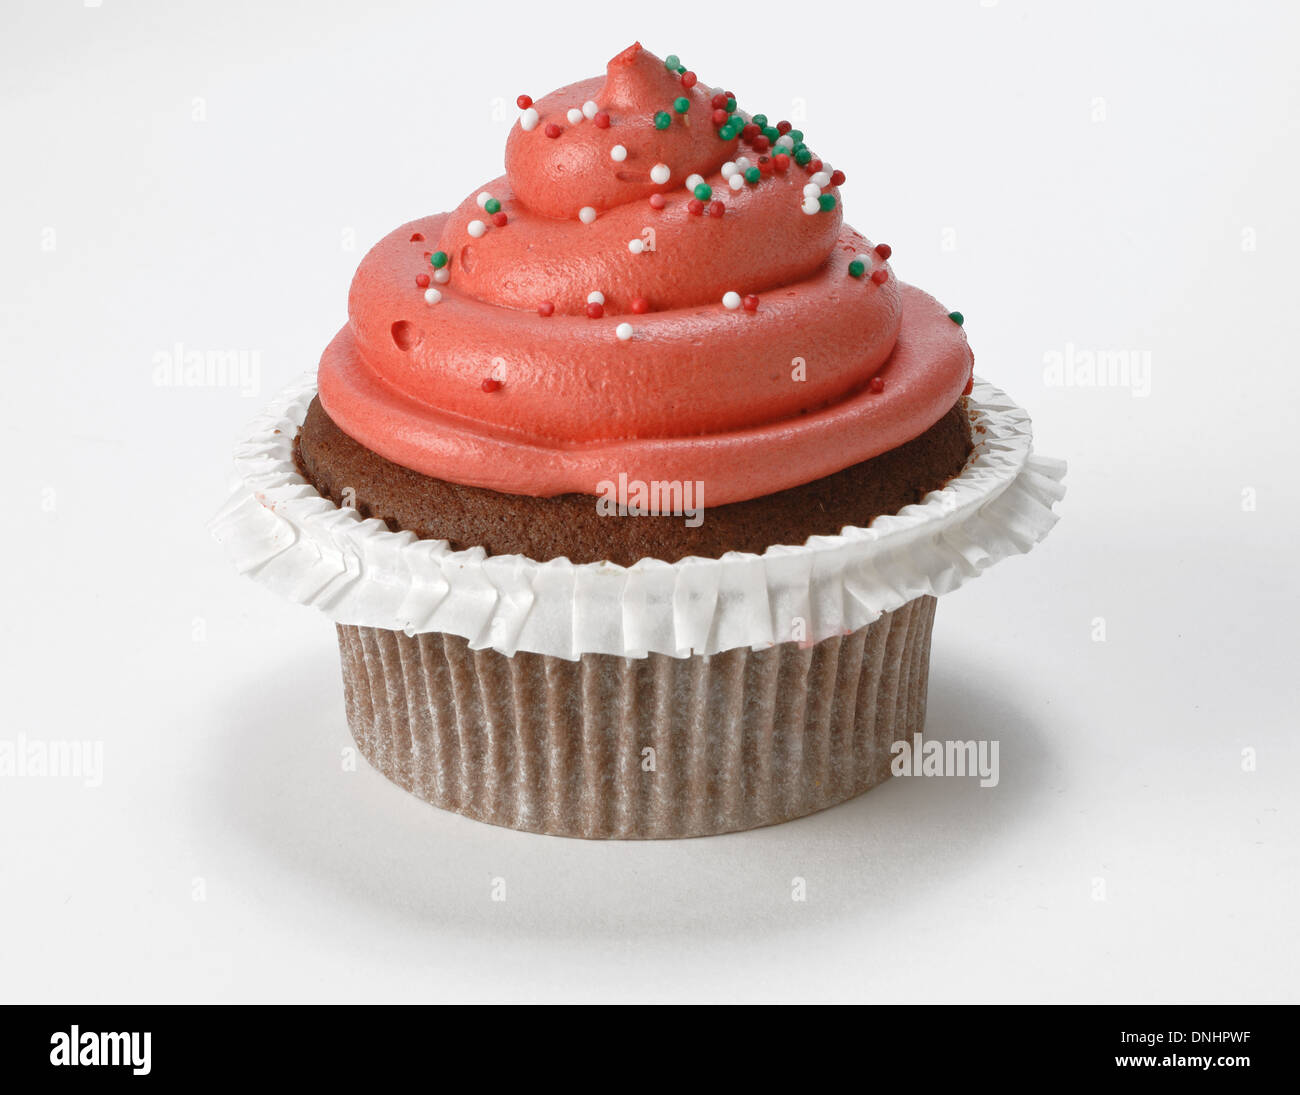 A single decorated red cupcake on a white background. Stock Photo